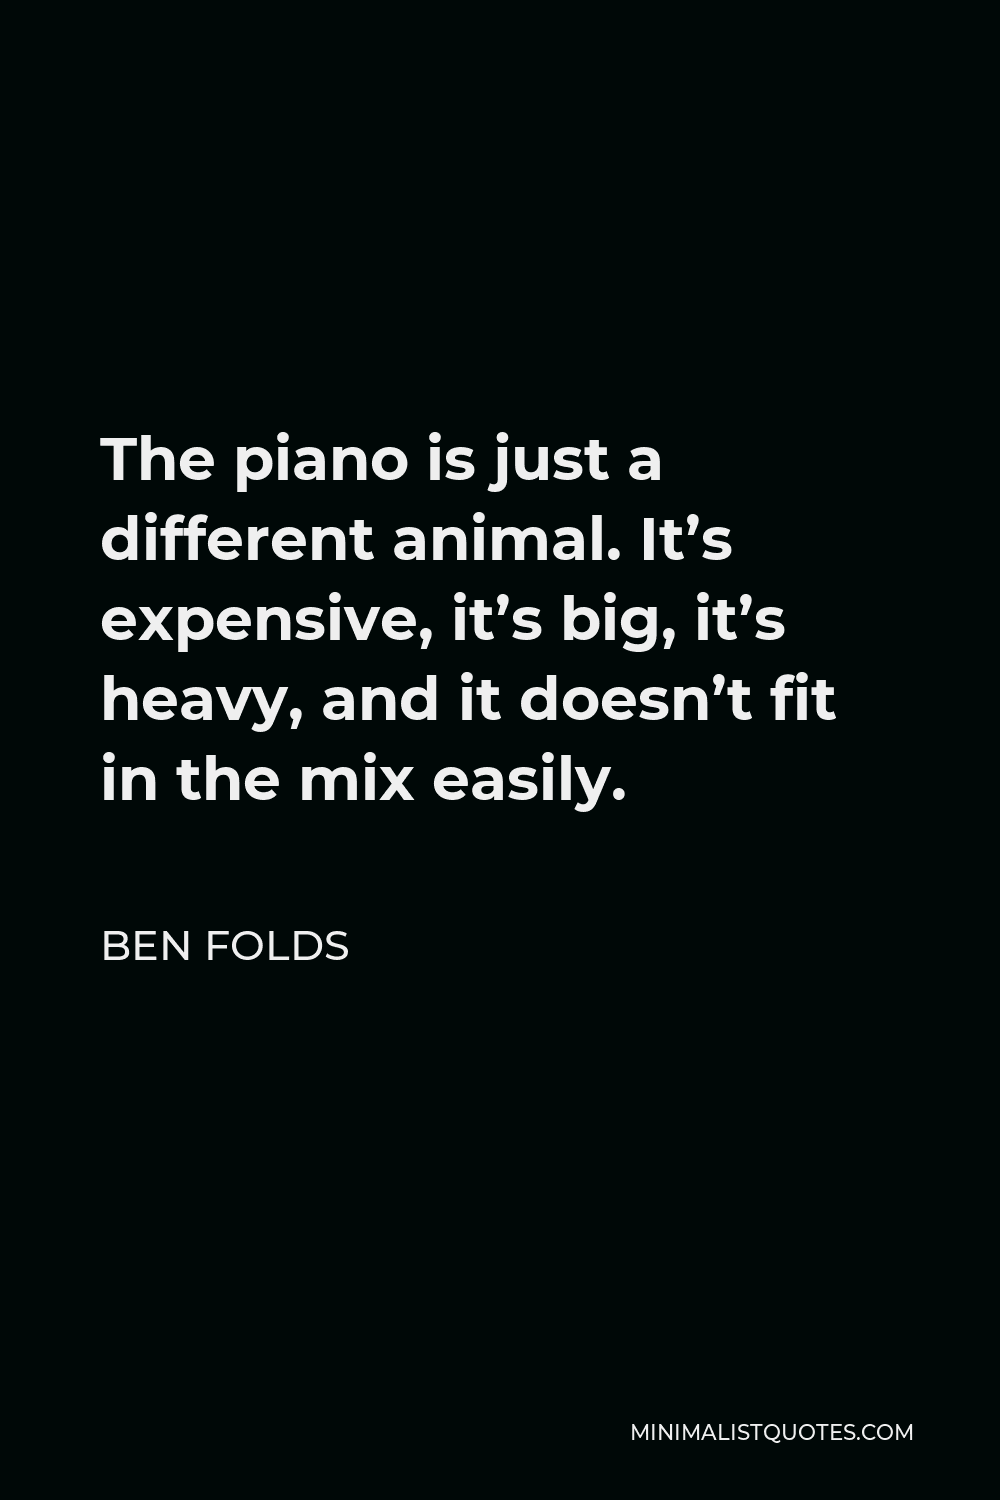 Ben Folds Quote - The piano is just a different animal. It’s expensive, it’s big, it’s heavy, and it doesn’t fit in the mix easily.